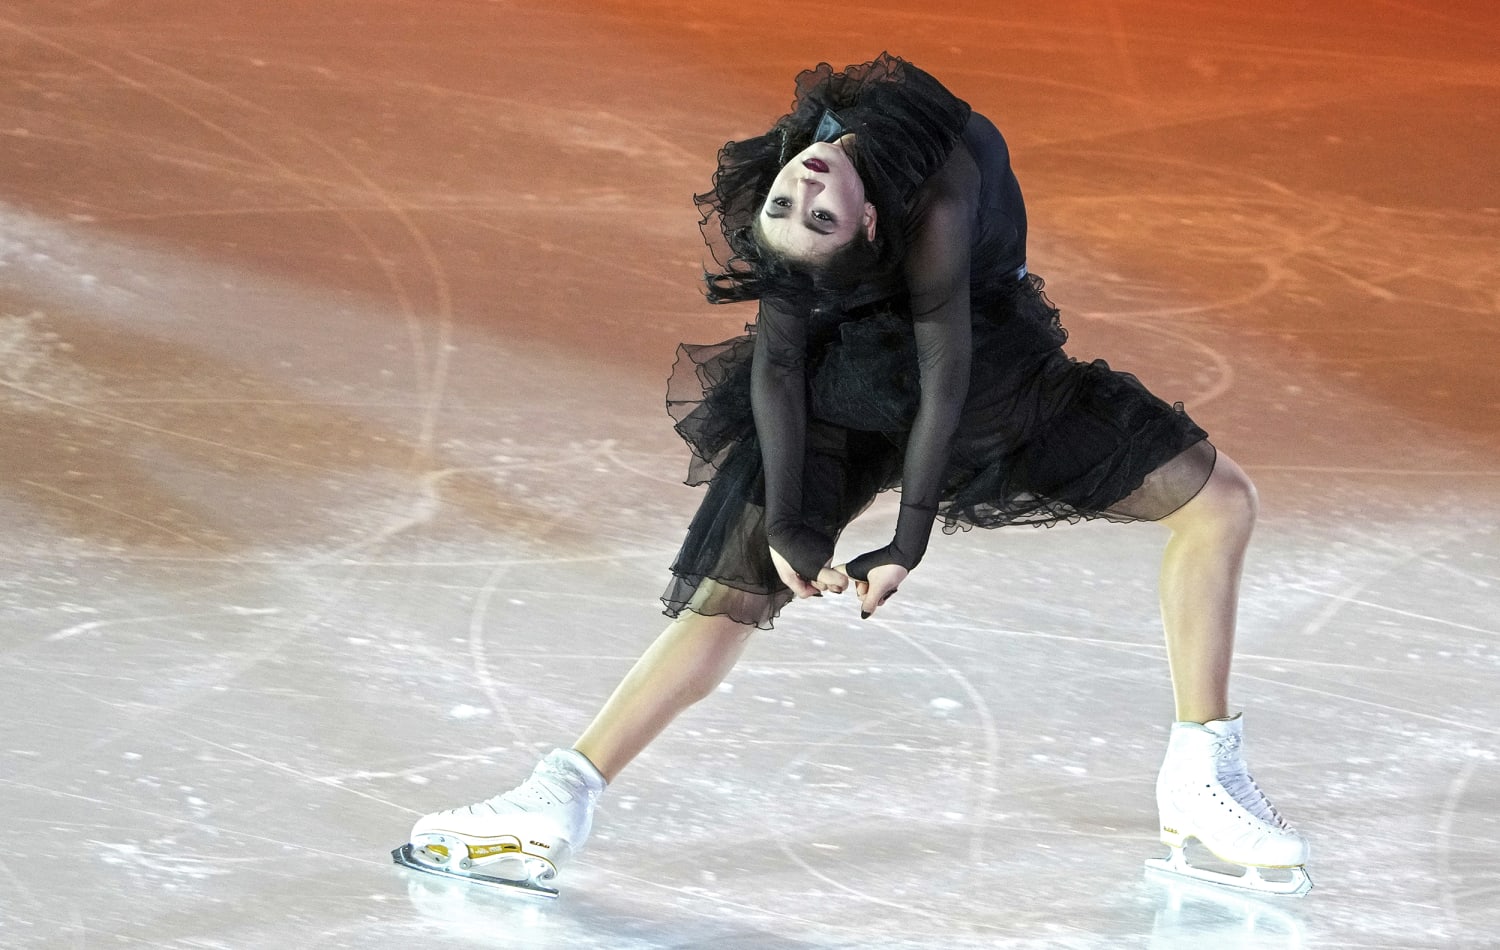 Figure Skater Re-creates Viral Wednesday Addams Dance On Ice